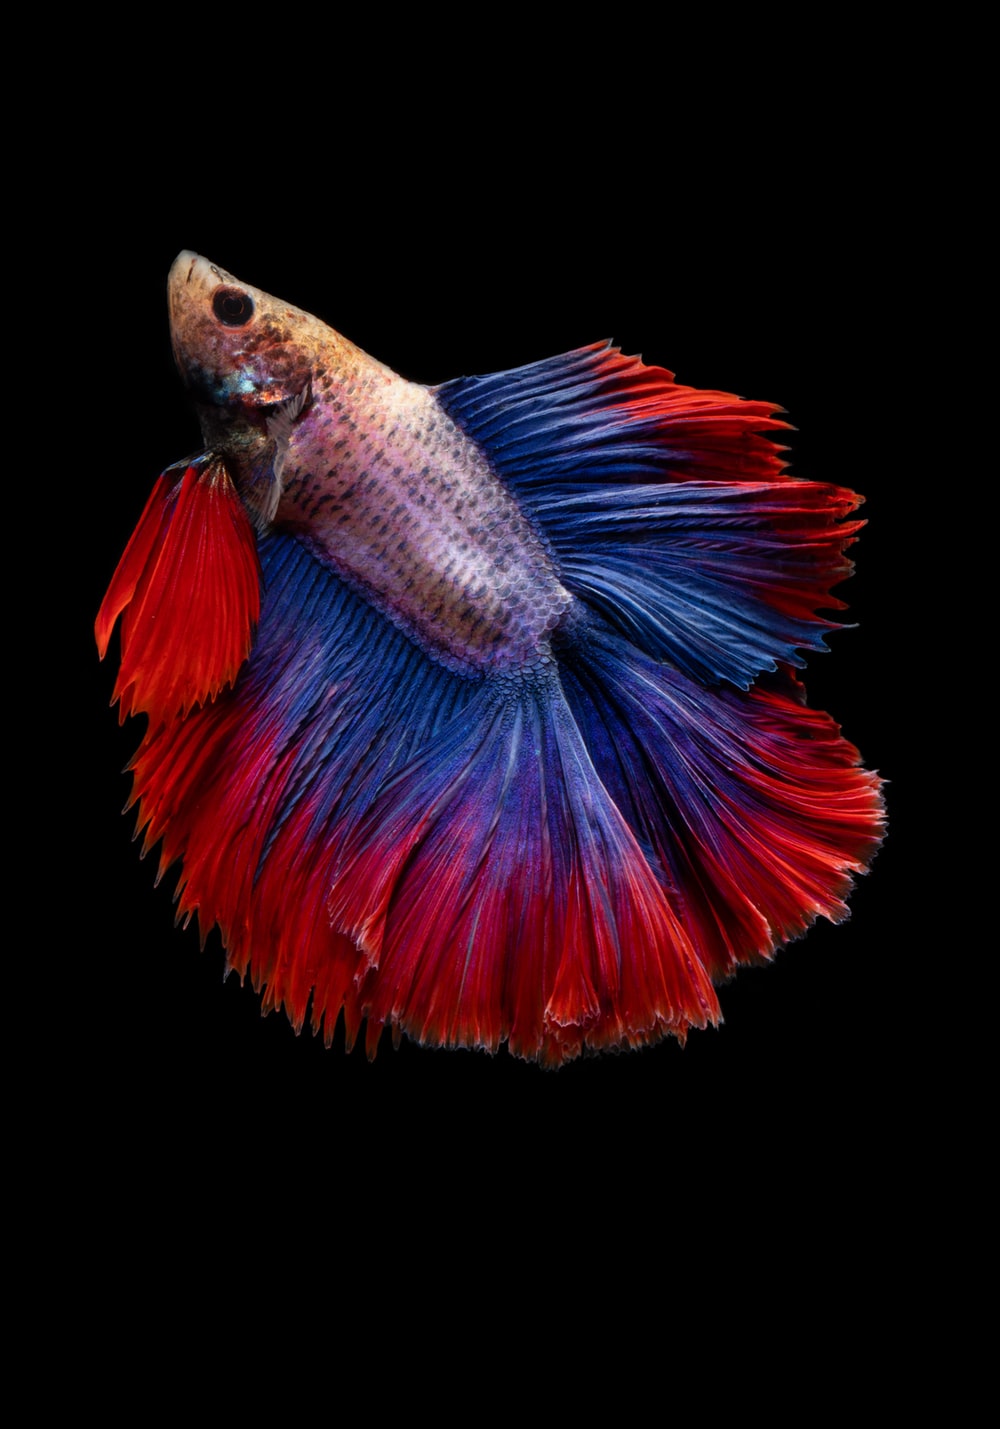 Discover The Best Betta Fish Here